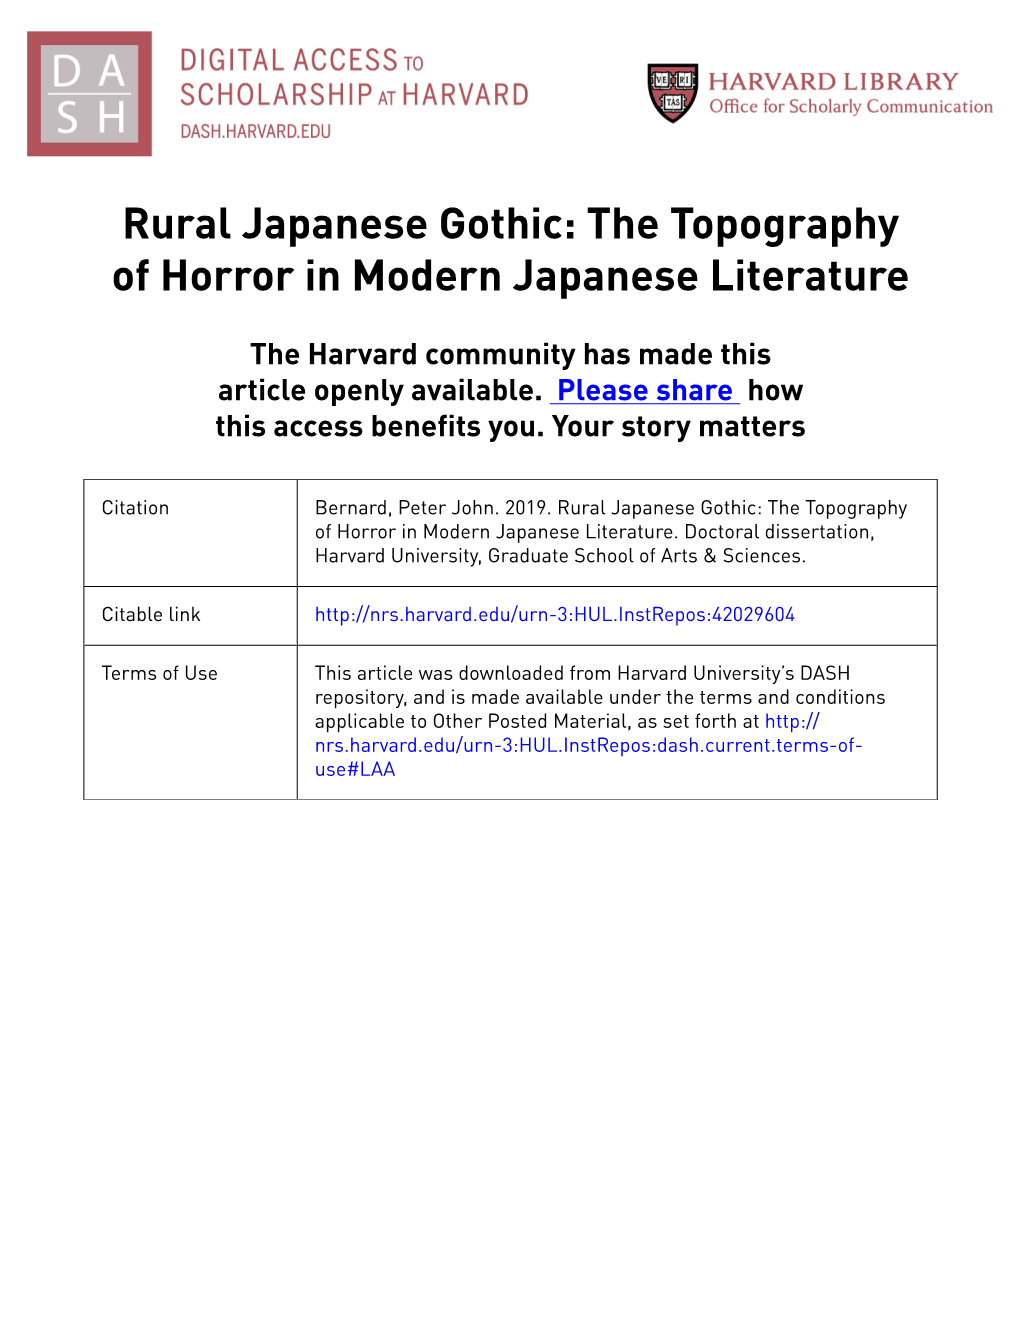 Rural Japanese Gothic: the Topography of Horror in Modern Japanese Literature